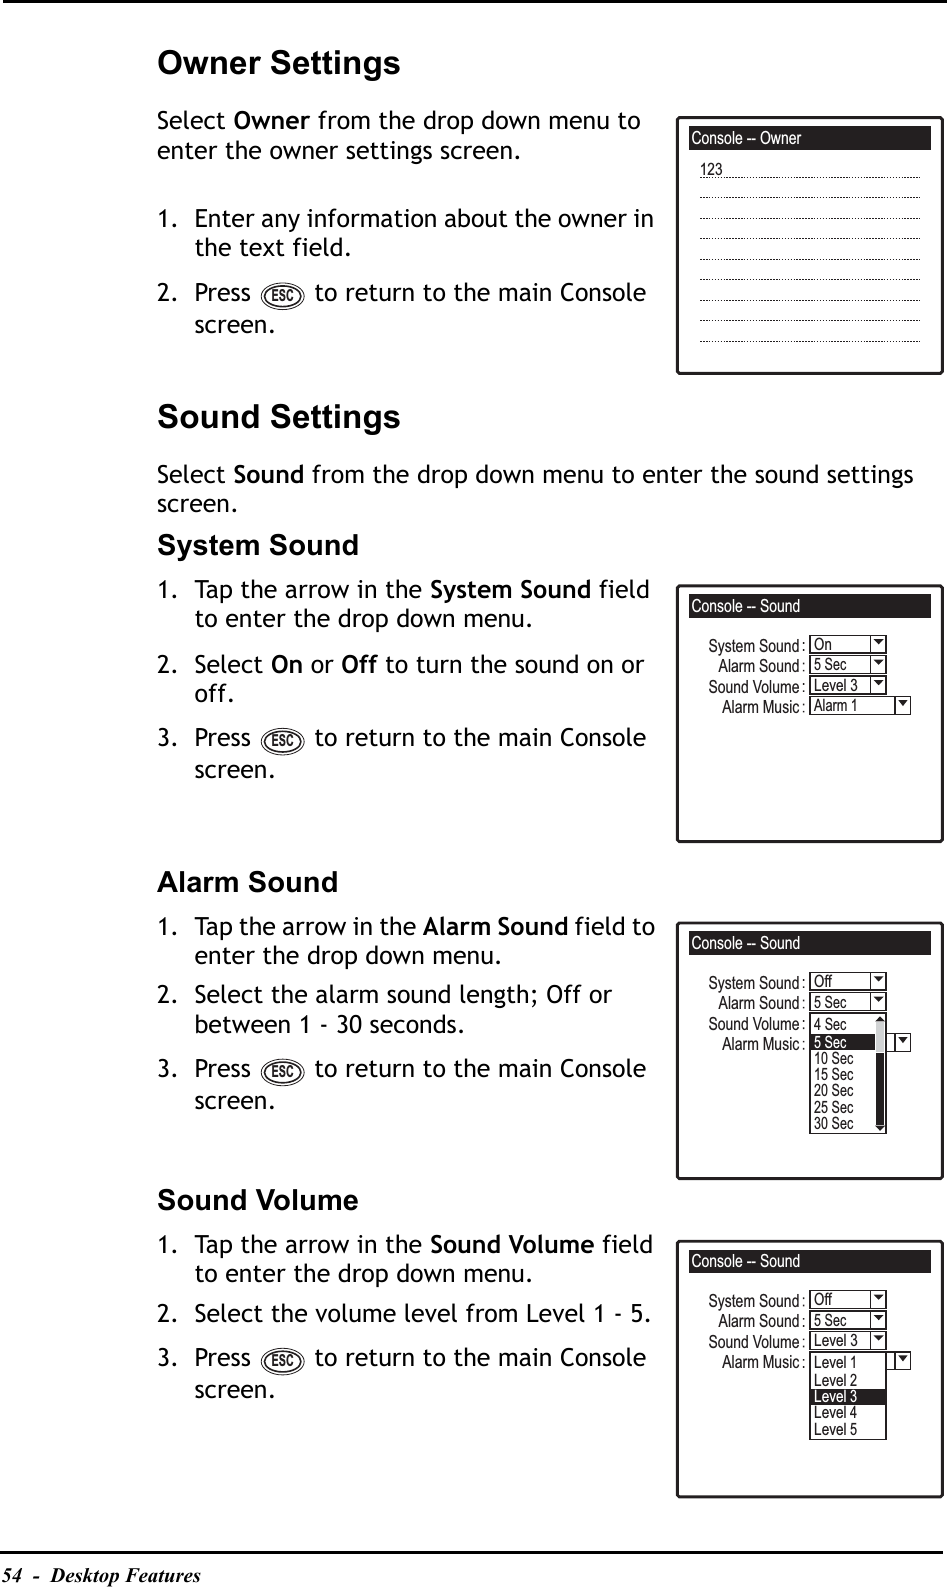 54  -  Desktop FeaturesOwner SettingsSelect Owner from the drop down menu to enter the owner settings screen.1. Enter any information about the owner in the text field.2. Press   to return to the main Console screen.Sound SettingsSelect Sound from the drop down menu to enter the sound settings screen.System Sound1. Tap the arrow in the System Sound field to enter the drop down menu.2. Select On or Off to turn the sound on or off.3. Press   to return to the main Console screen.Alarm Sound1. Tap the arrow in the Alarm Sound field to enter the drop down menu.2. Select the alarm sound length; Off or between 1 - 30 seconds.3. Press   to return to the main Console screen.Sound Volume1. Tap the arrow in the Sound Volume field to enter the drop down menu.2. Select the volume level from Level 1 - 5.3. Press   to return to the main Console screen.Console -- Owner123ESCConsole -- SoundLevel 35 SecOnAlarm 1System SoundSound VolumeAlarm SoundAlarm MusicESCConsole -- SoundLevel 35 SecOffAlarm 1System SoundSound VolumeAlarm SoundAlarm Music4Sec5 Sec10 Sec15 Sec20 Sec25 Sec30 SecESCConsole -- SoundLevel 35 SecOffAlarm 1System SoundSound VolumeAlarm SoundAlarm MusicLevel 1Level 2Level 3Level 4Level 5ESC